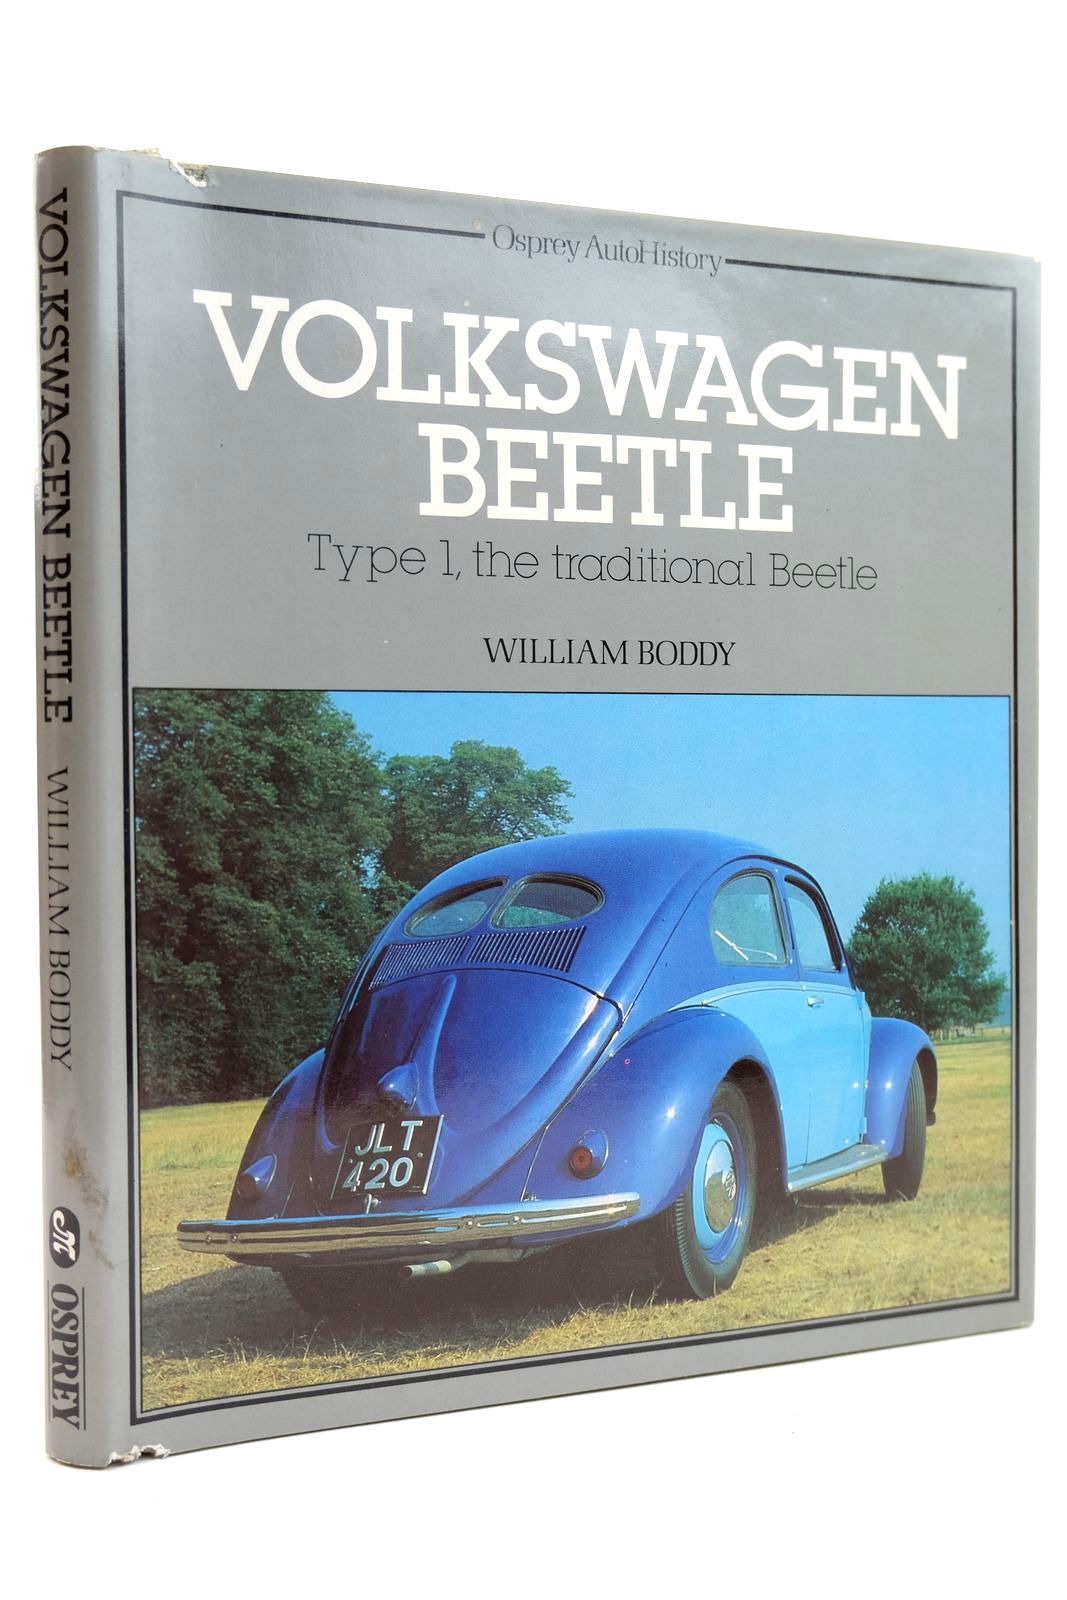 Photo of VOLKSWAGEN BEETLE TYPE 1, THE TRADITIONAL BEETLE written by Boddy, William published by Osprey Publications Ltd (STOCK CODE: 2131825)  for sale by Stella & Rose's Books